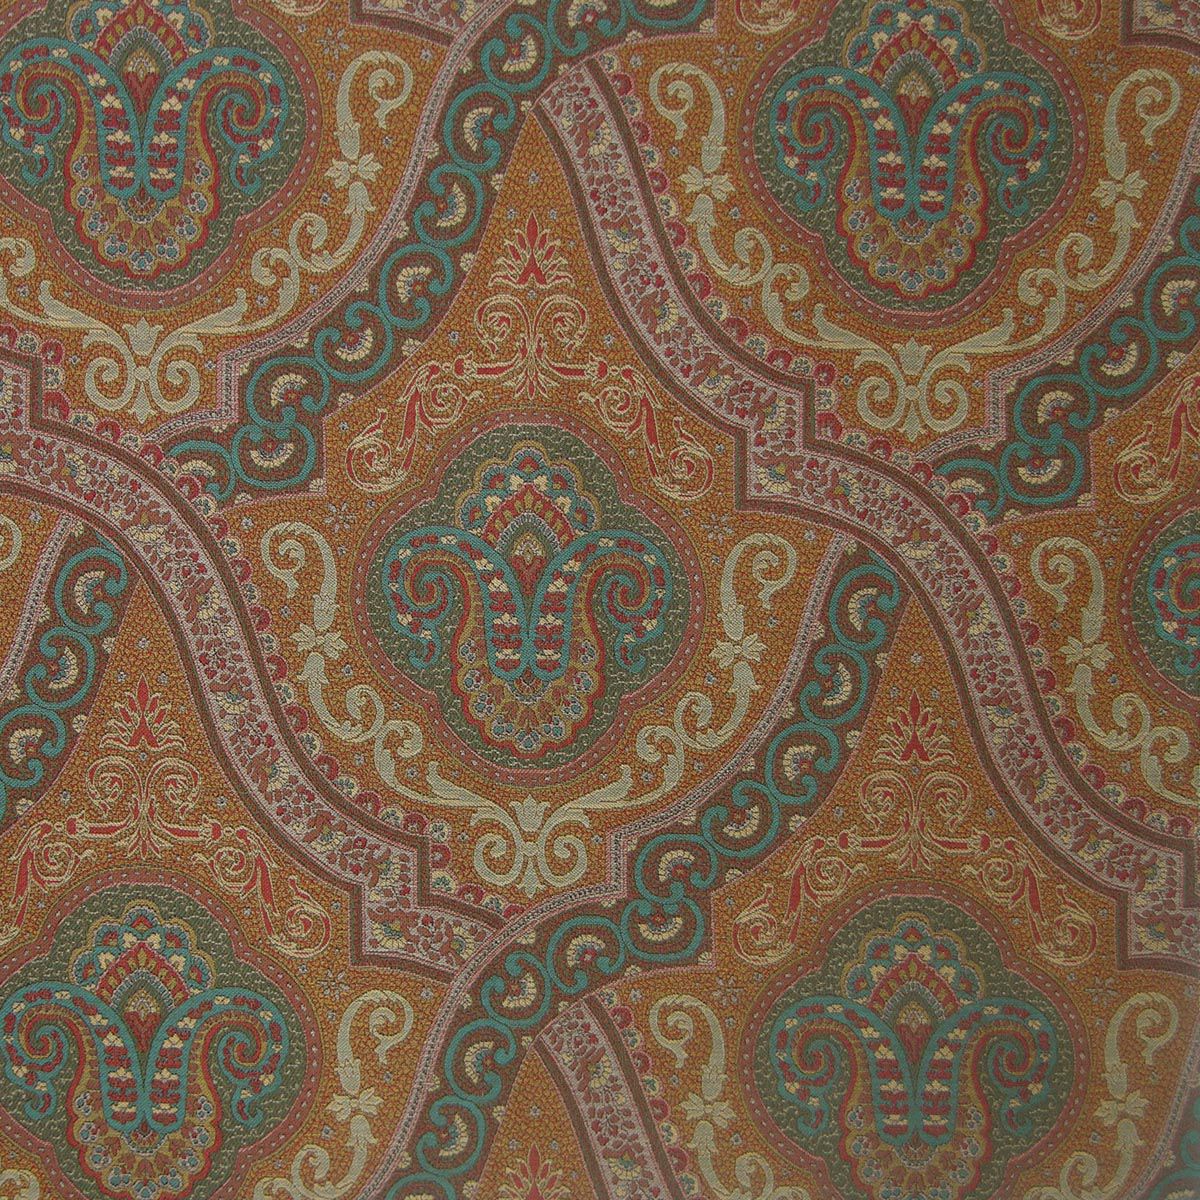 Antonova fabric in teal gold color - pattern number ET 00041819 - by Scalamandre in the Old World Weavers collection